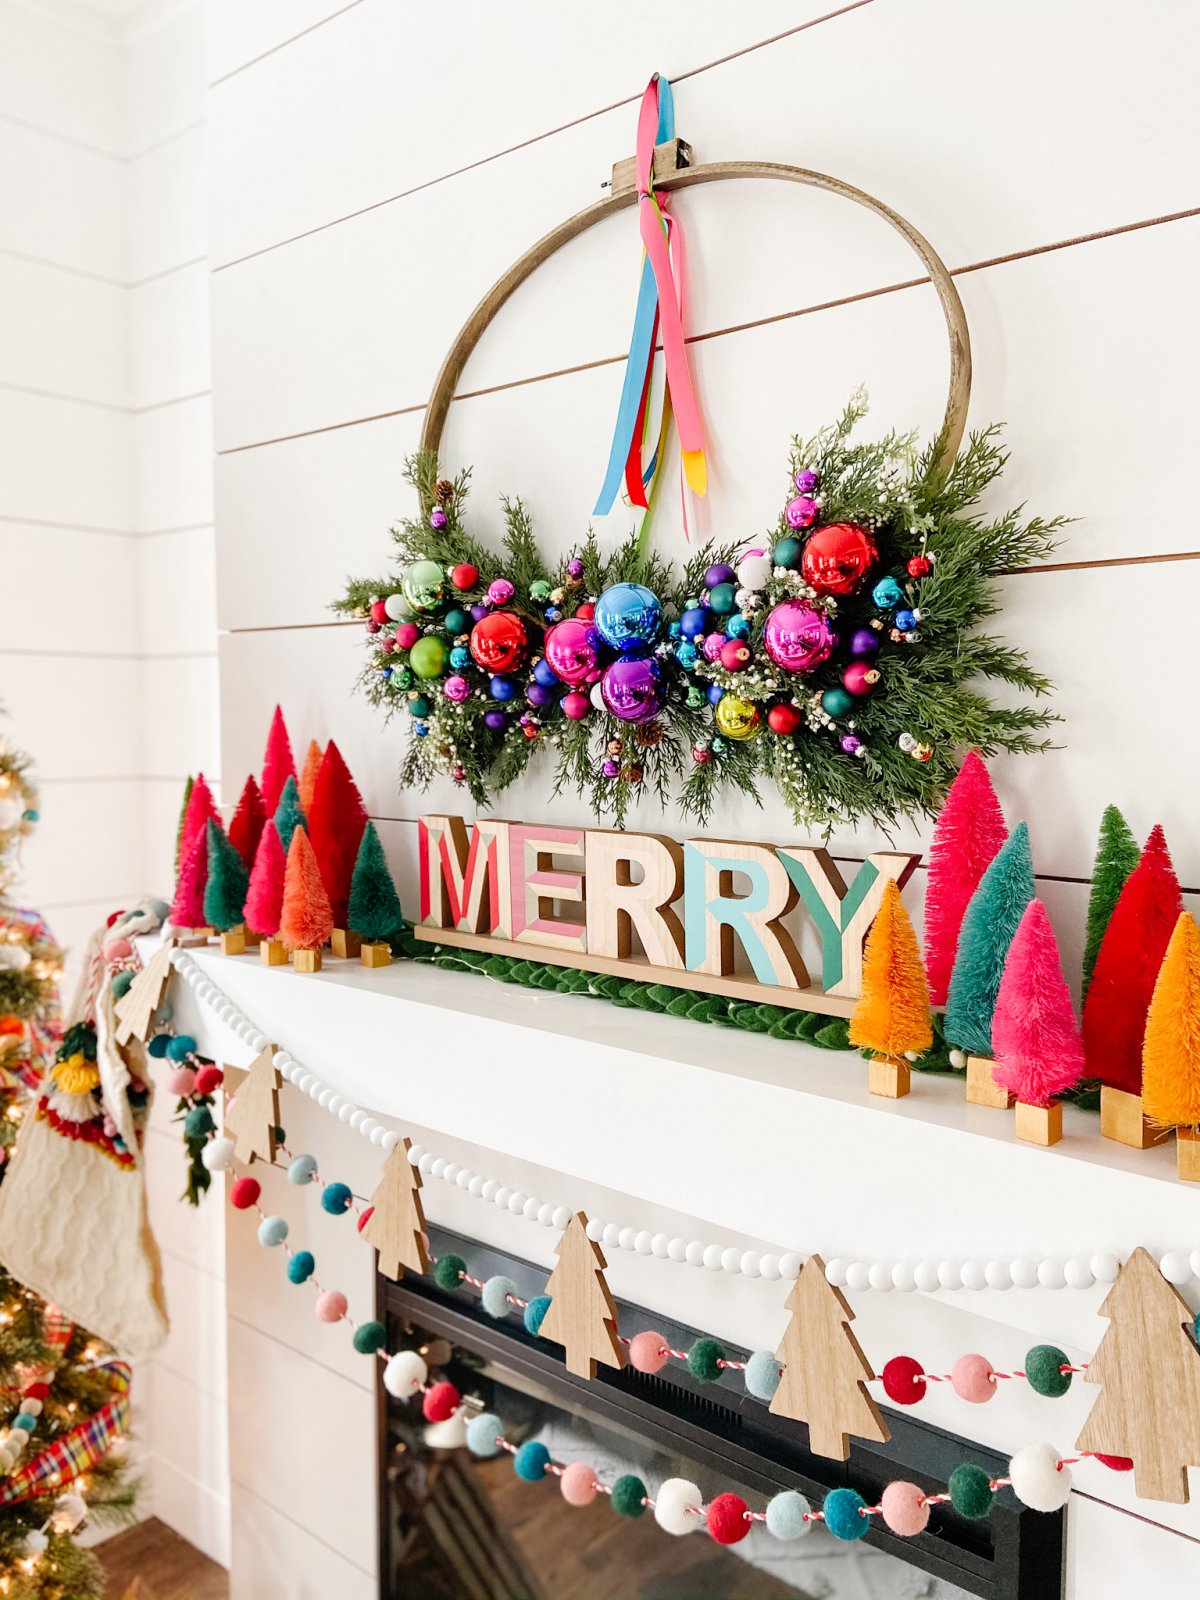 Colorful Holiday Embroidery Hoop Ornament Wreath. Create a stunning holiday wreath with inexpensive ornaments, faux greens and a simple embroidery hoop. 